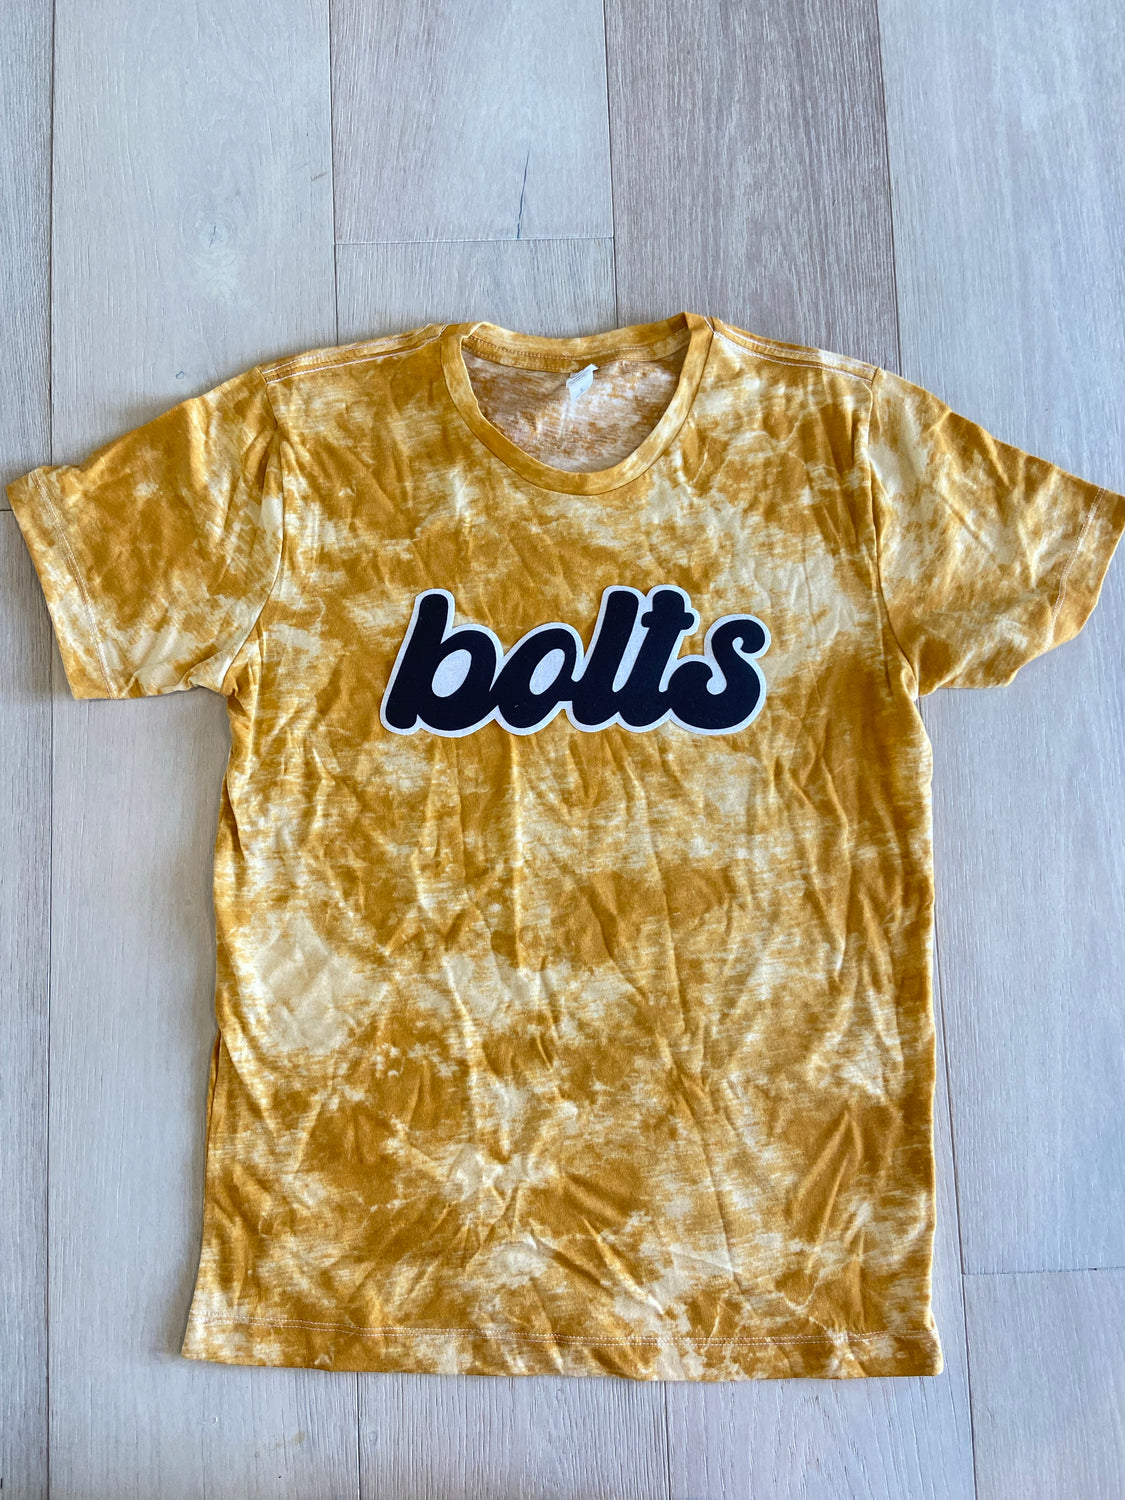 BOLTS - YELLOW DYED TEE